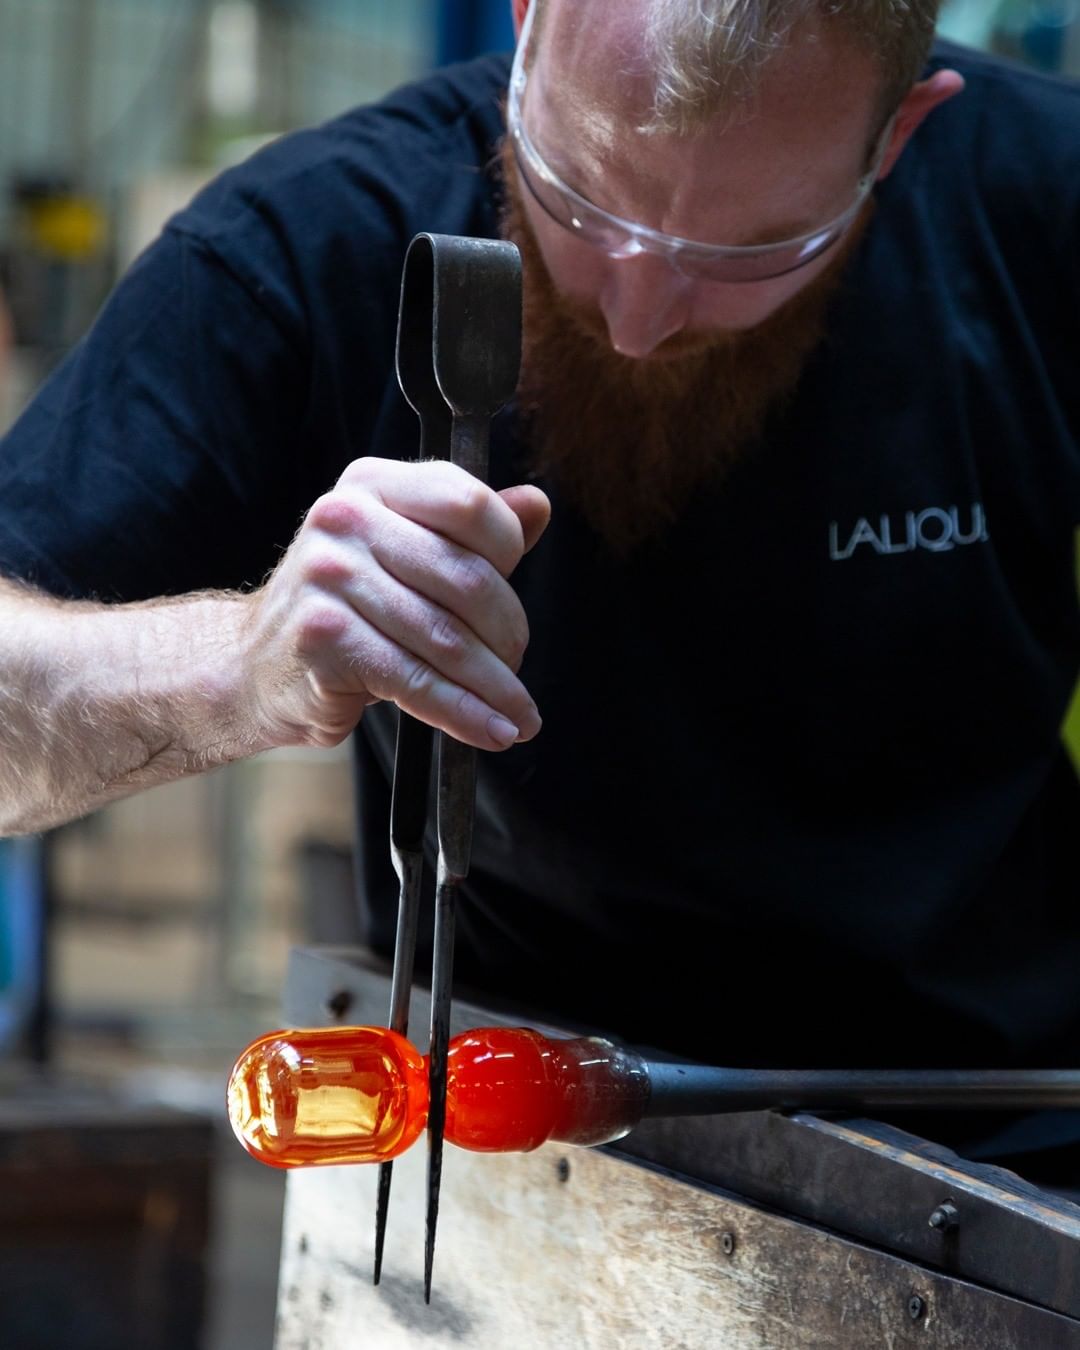 LALIQUE - Scenes from the hot glass workshop, where the first steps of creating the Hirondelles flacon take place.
.
.
.
.
.
#hirondelles #hirondellesflacon #laliquecrafstmanship #laliqueknowhow #meil...